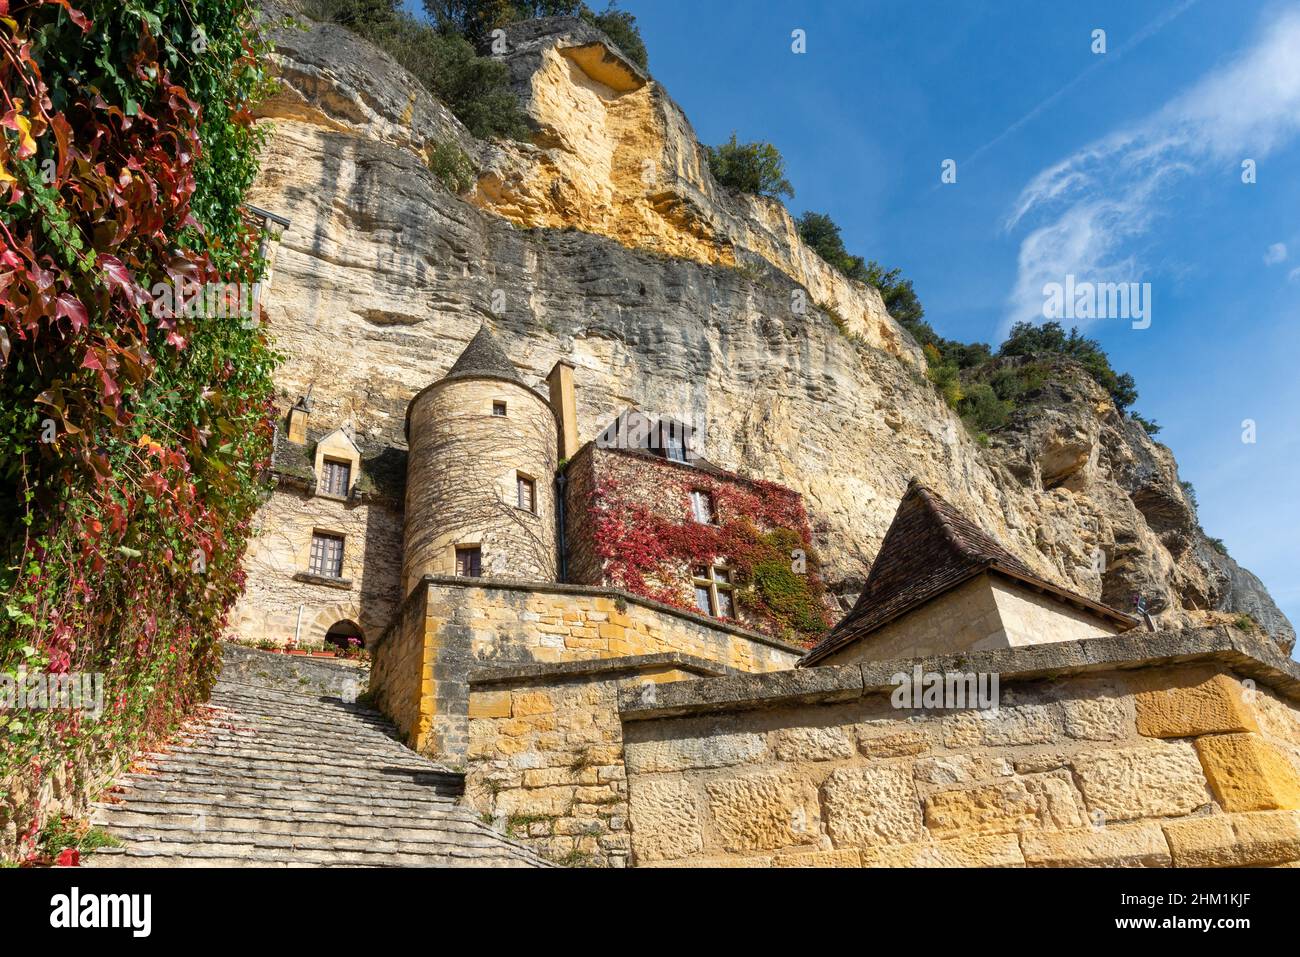 Limestone cliff and historic houses made of yellow stones of La Roque-Gageac, Perigord, taken on a sunny autumn afternoon Stock Photo